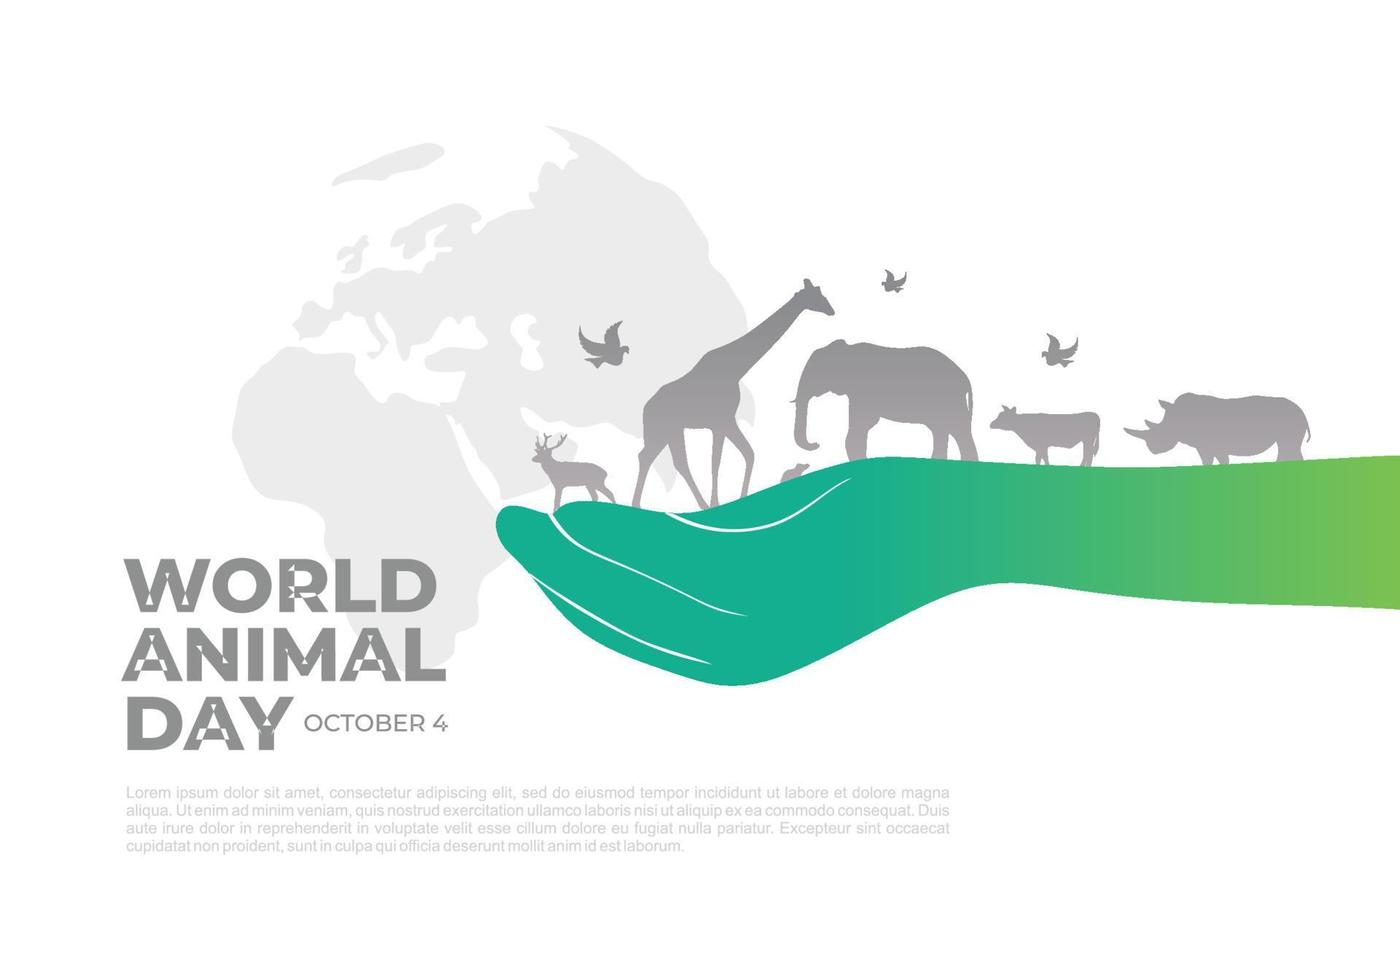 World animal day with world map and animal on hand on october 4. vector